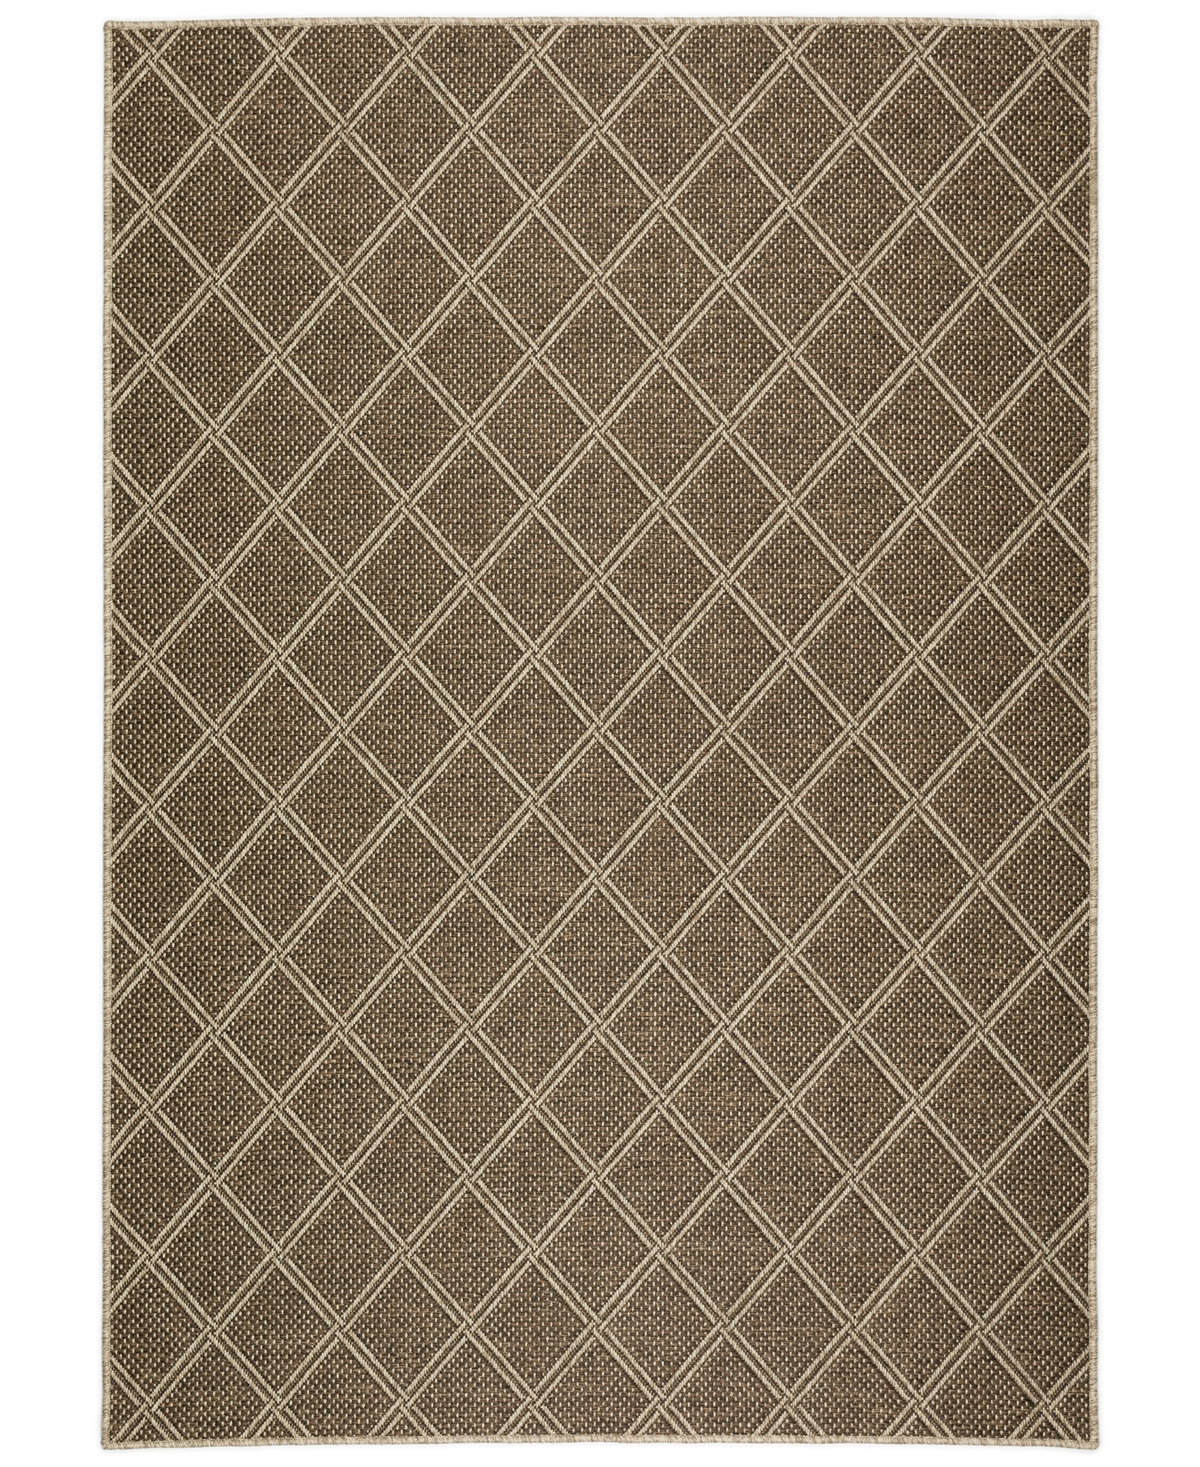 D Style Nusa Outdoor Nsa3 8' X 10' Area Rug In Chocolate